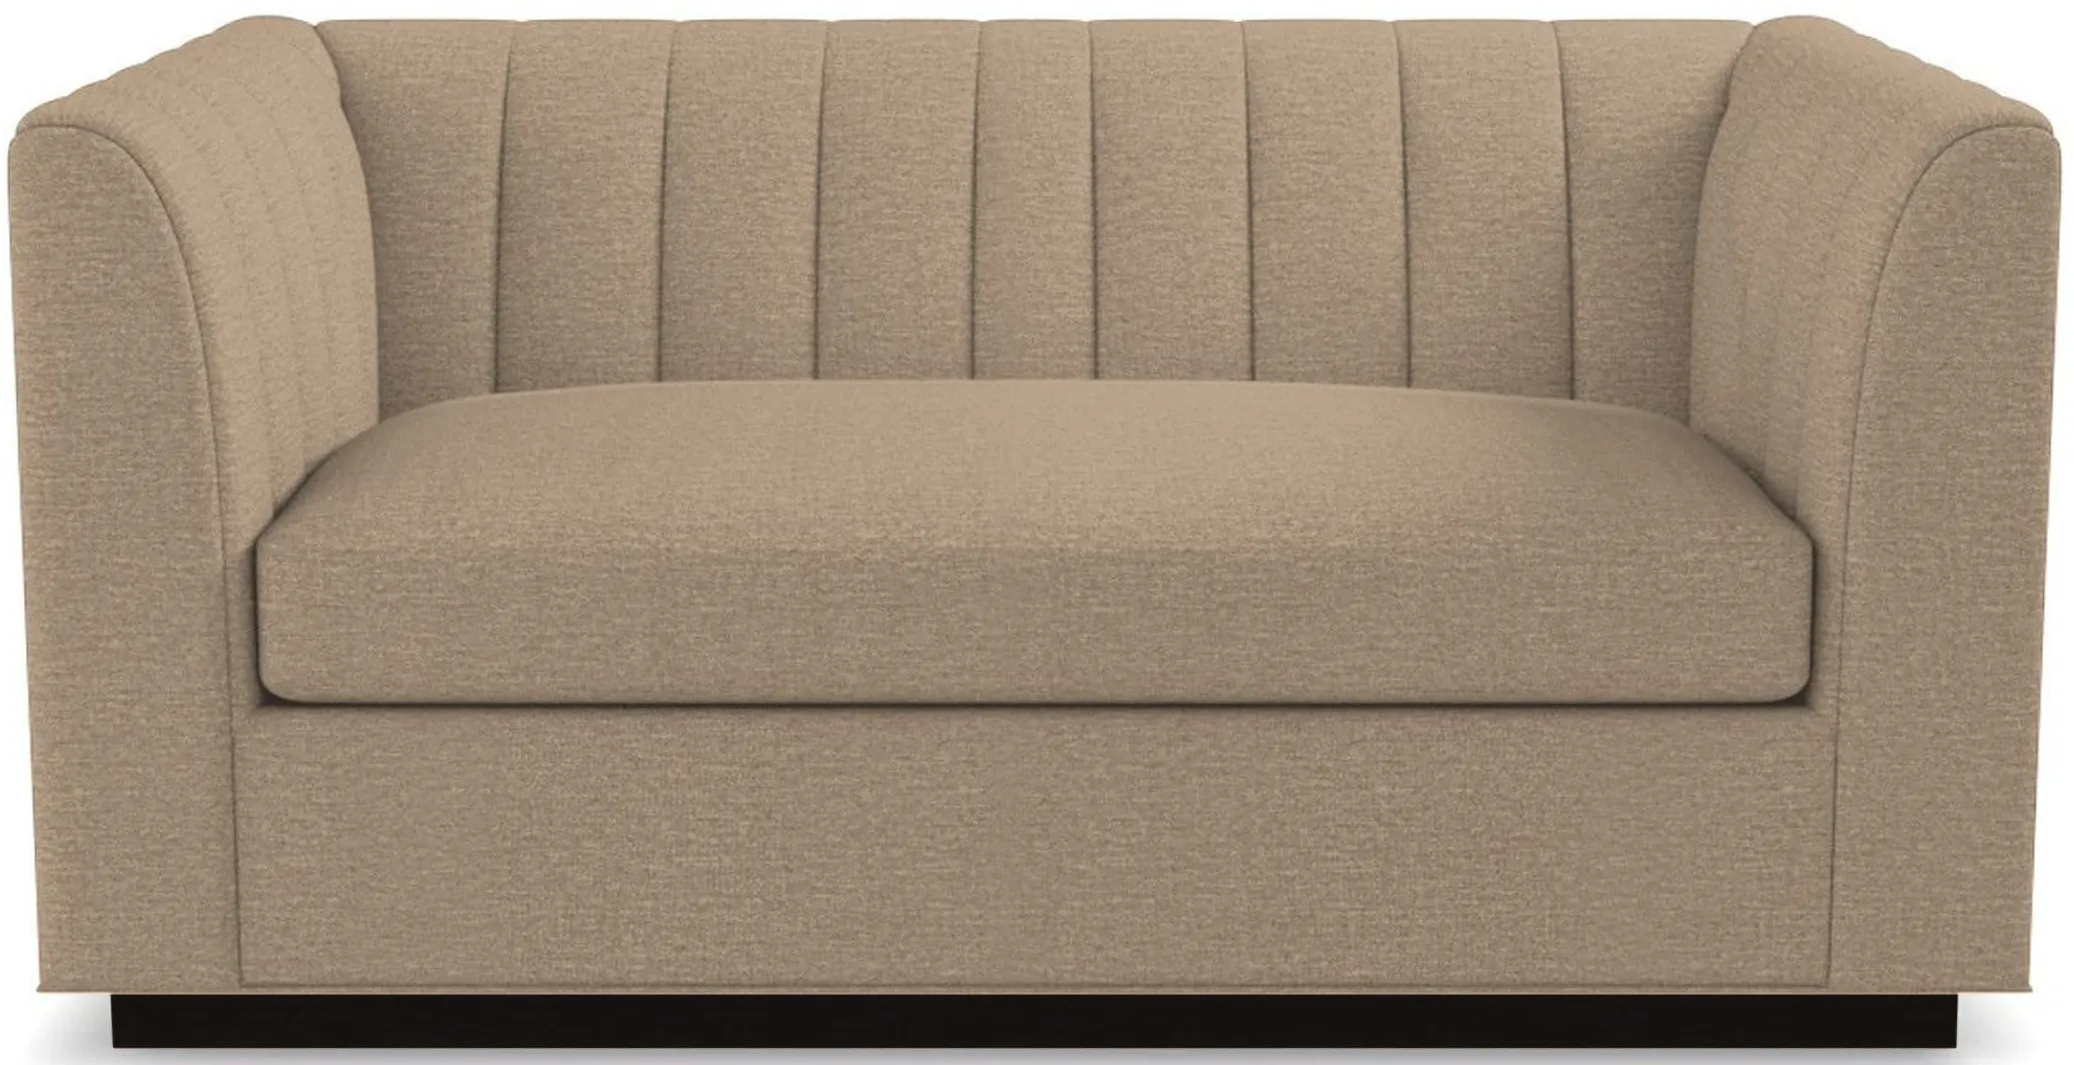 Nora Apartment Size Sleeper Sofa Bed